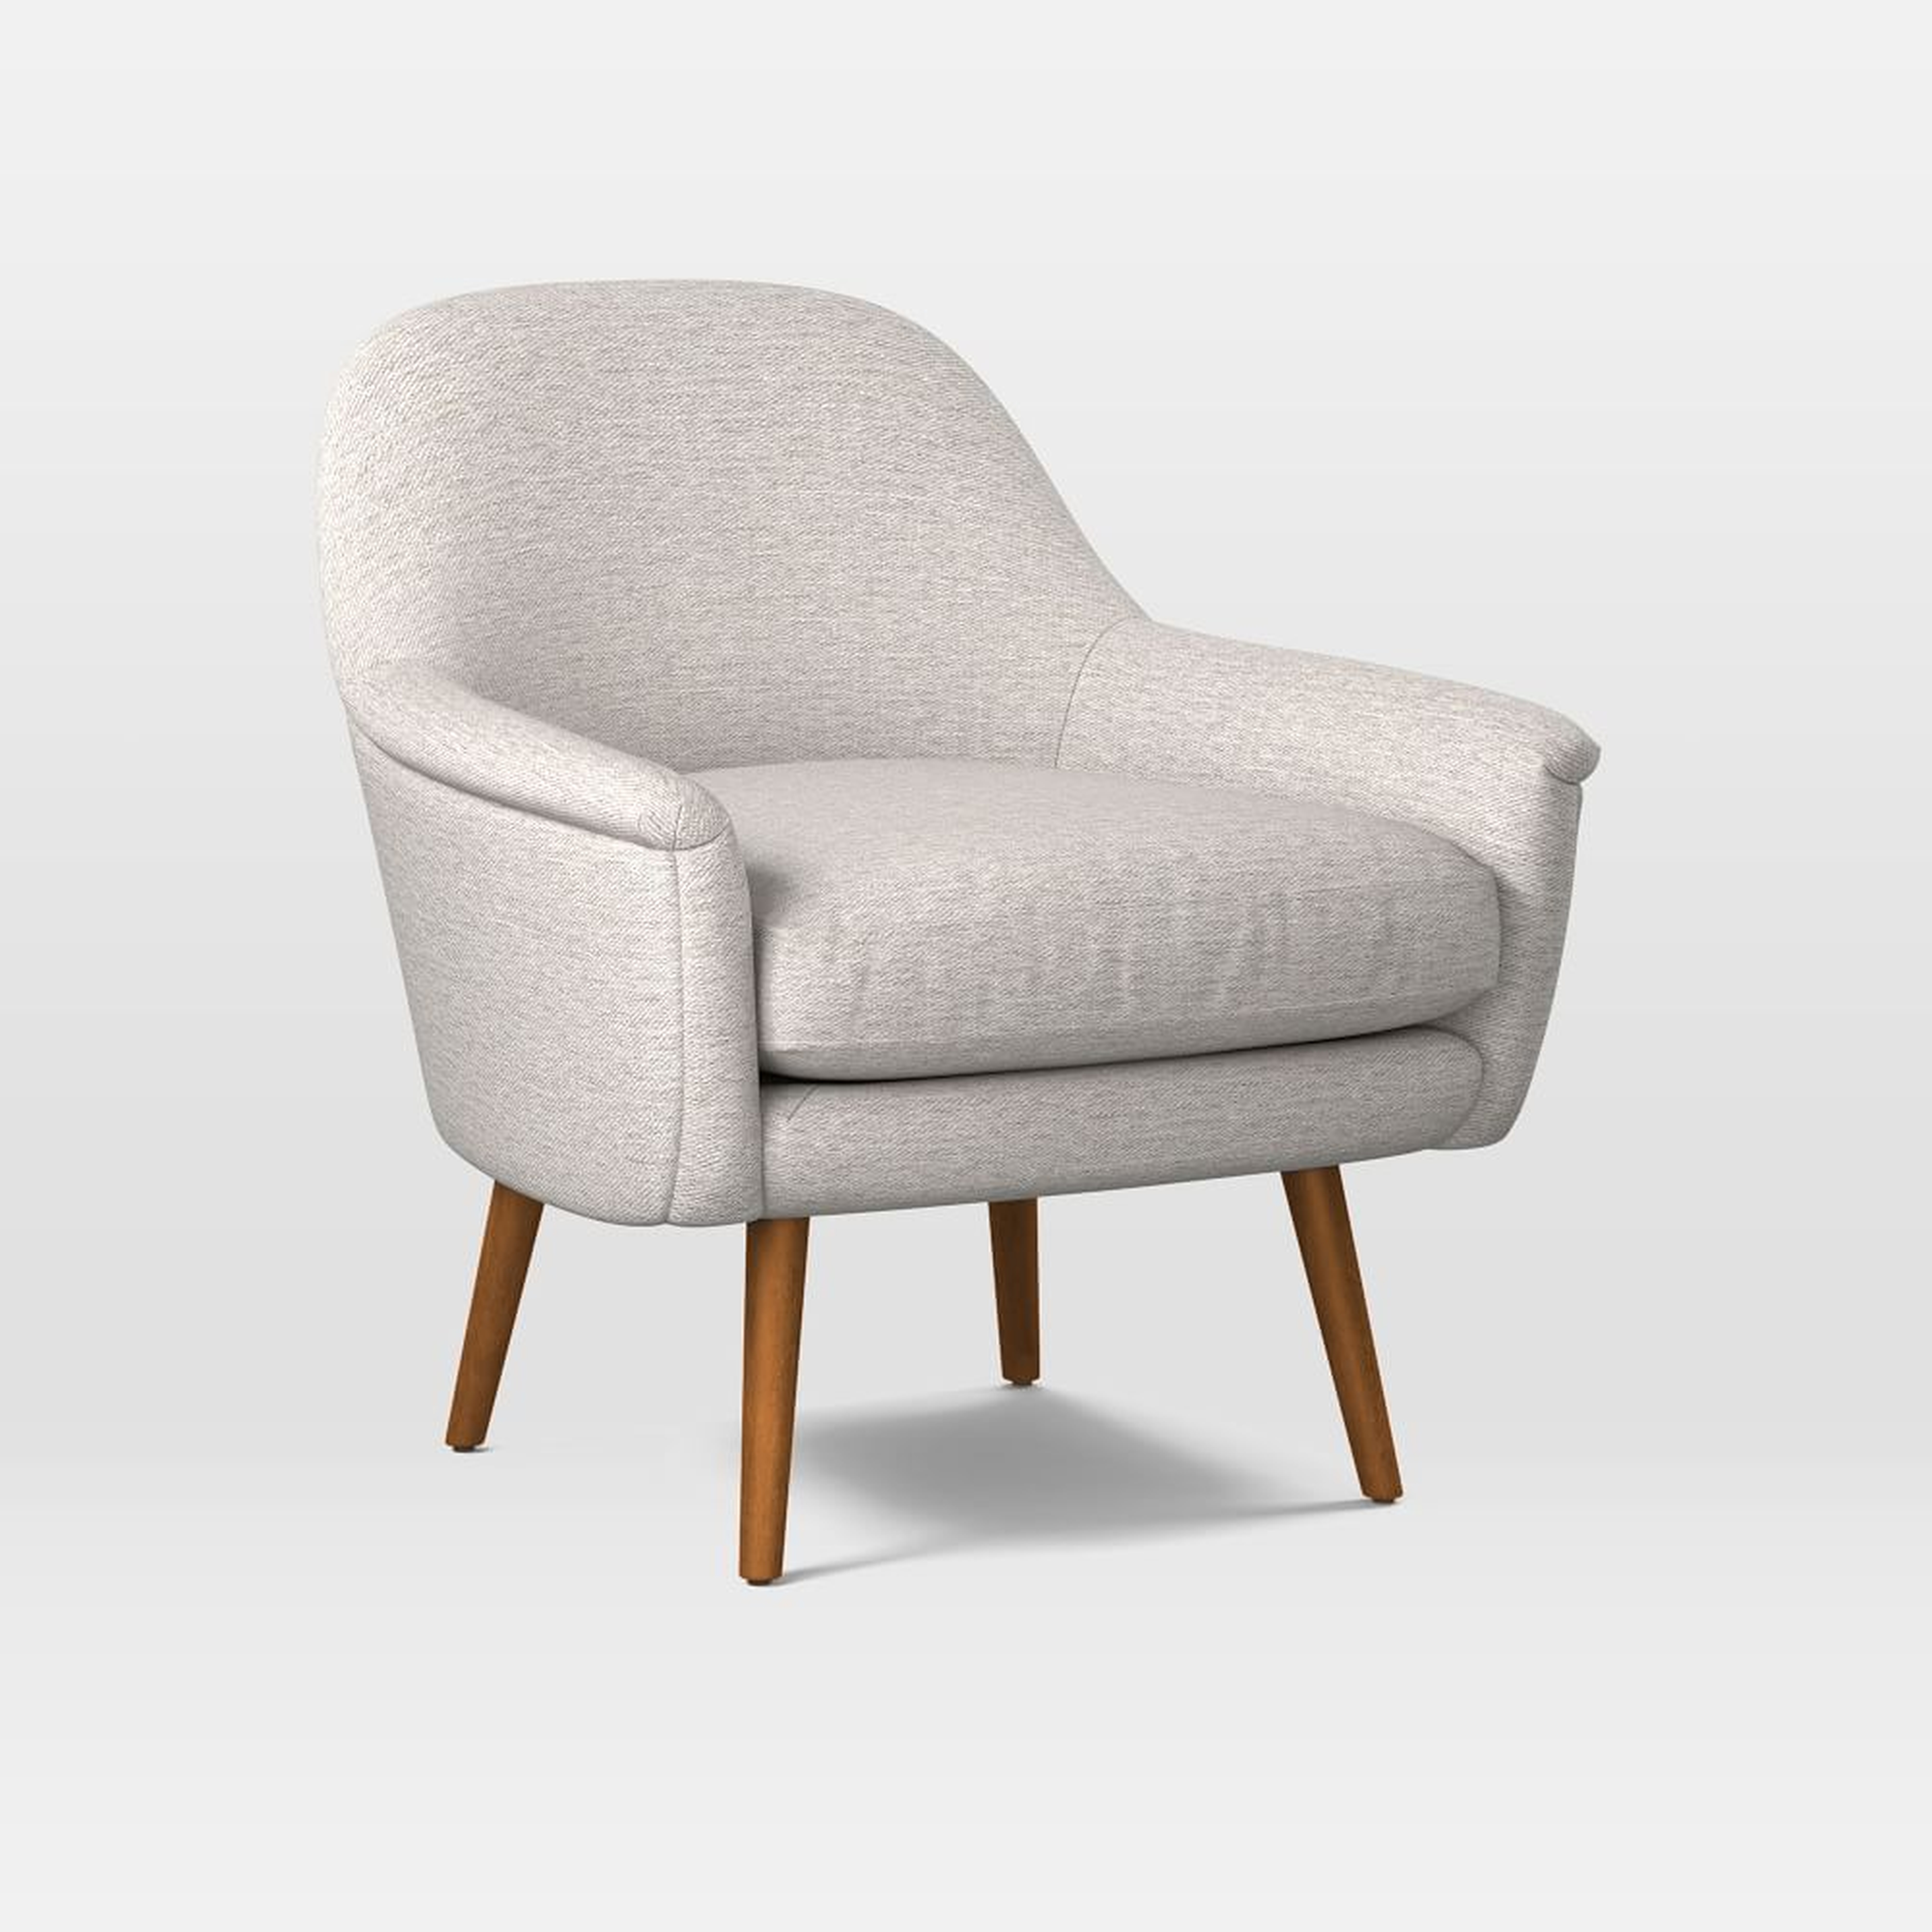 Phoebe Midcentury Chair, Poly, Twill, Sand, Pecan - West Elm